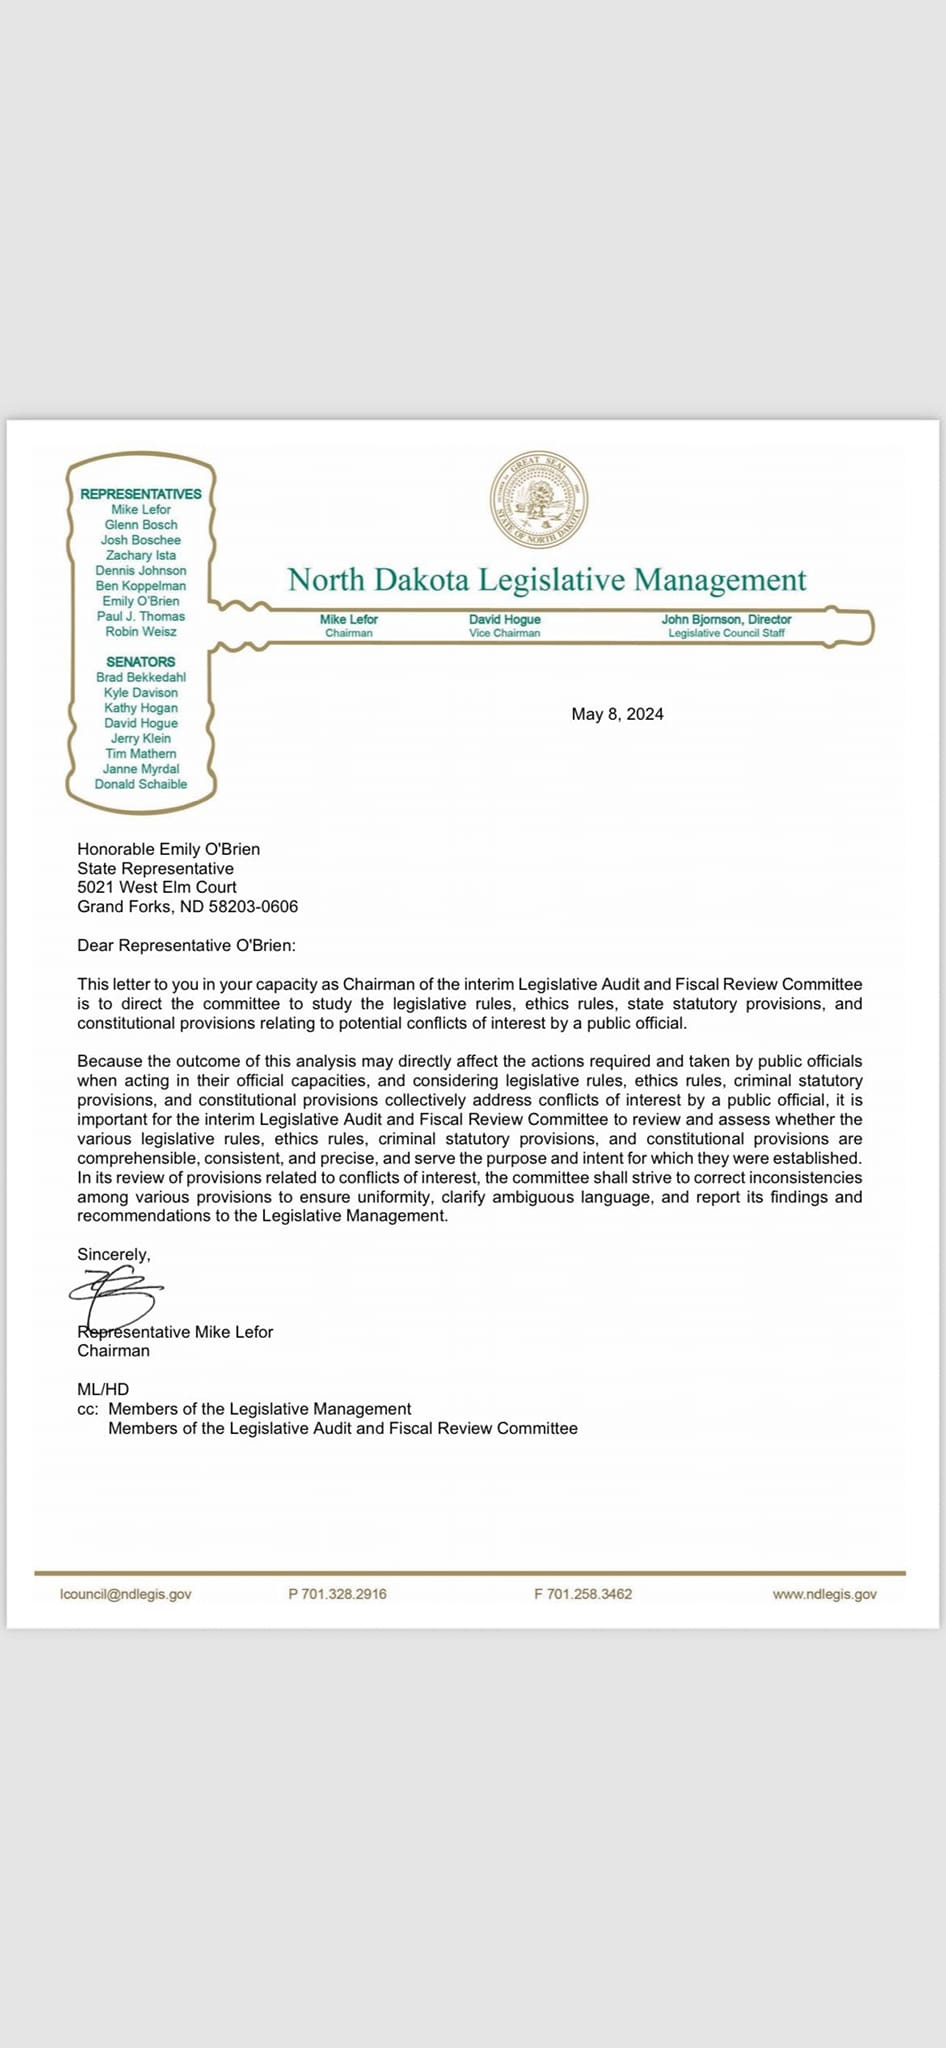 May be an image of ticket stub and text that says 'REPRESENTATIVES MisLefor DennisJohnson OBren SNTORS North Dakota Legislative Management DavidHague Director drector LepaliteCoonel May 2024 Honorable Emily O'Brien Dear Representative 'Brienc Auditand Commitee and stasutory gislative consttutiona provisiorsa are npo findings Lefor MUHD Members Members Legislative Management te Legislasive Audit Fiscal Review Committee icounoi@ndlegis g0v P701.3282916 F701 3462 www.ndlegs.gow'